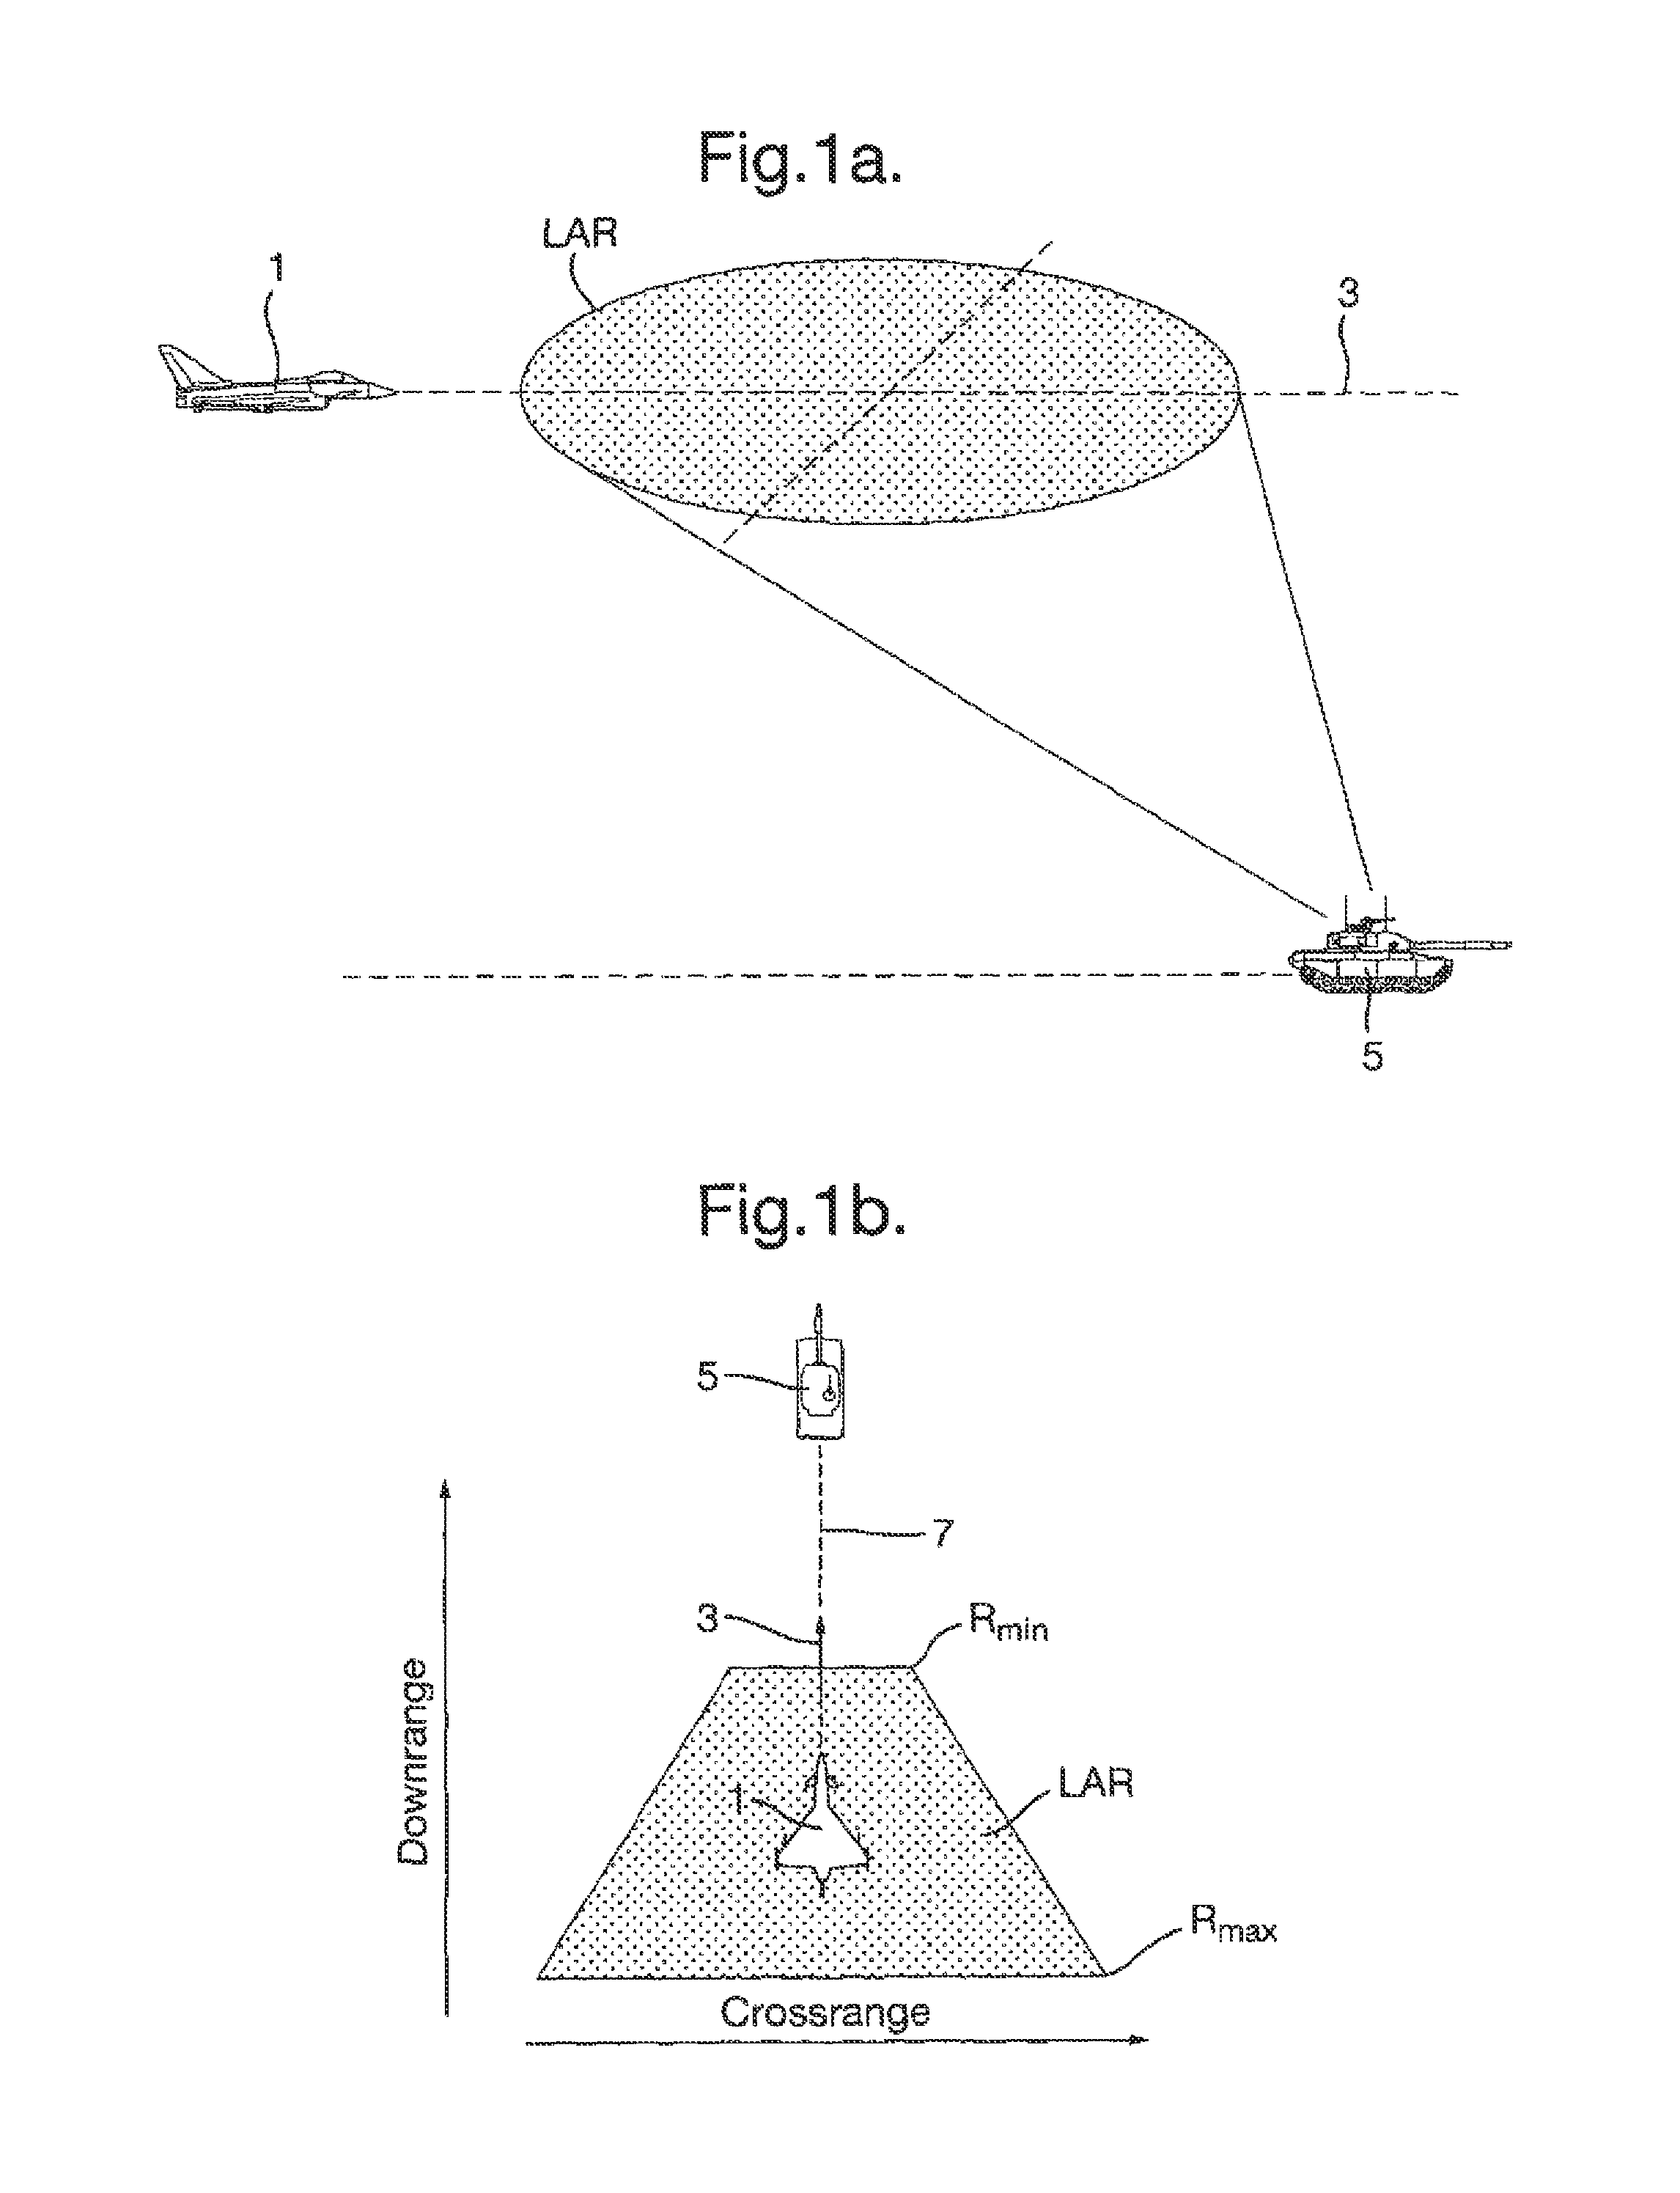 System integration for feasibility display